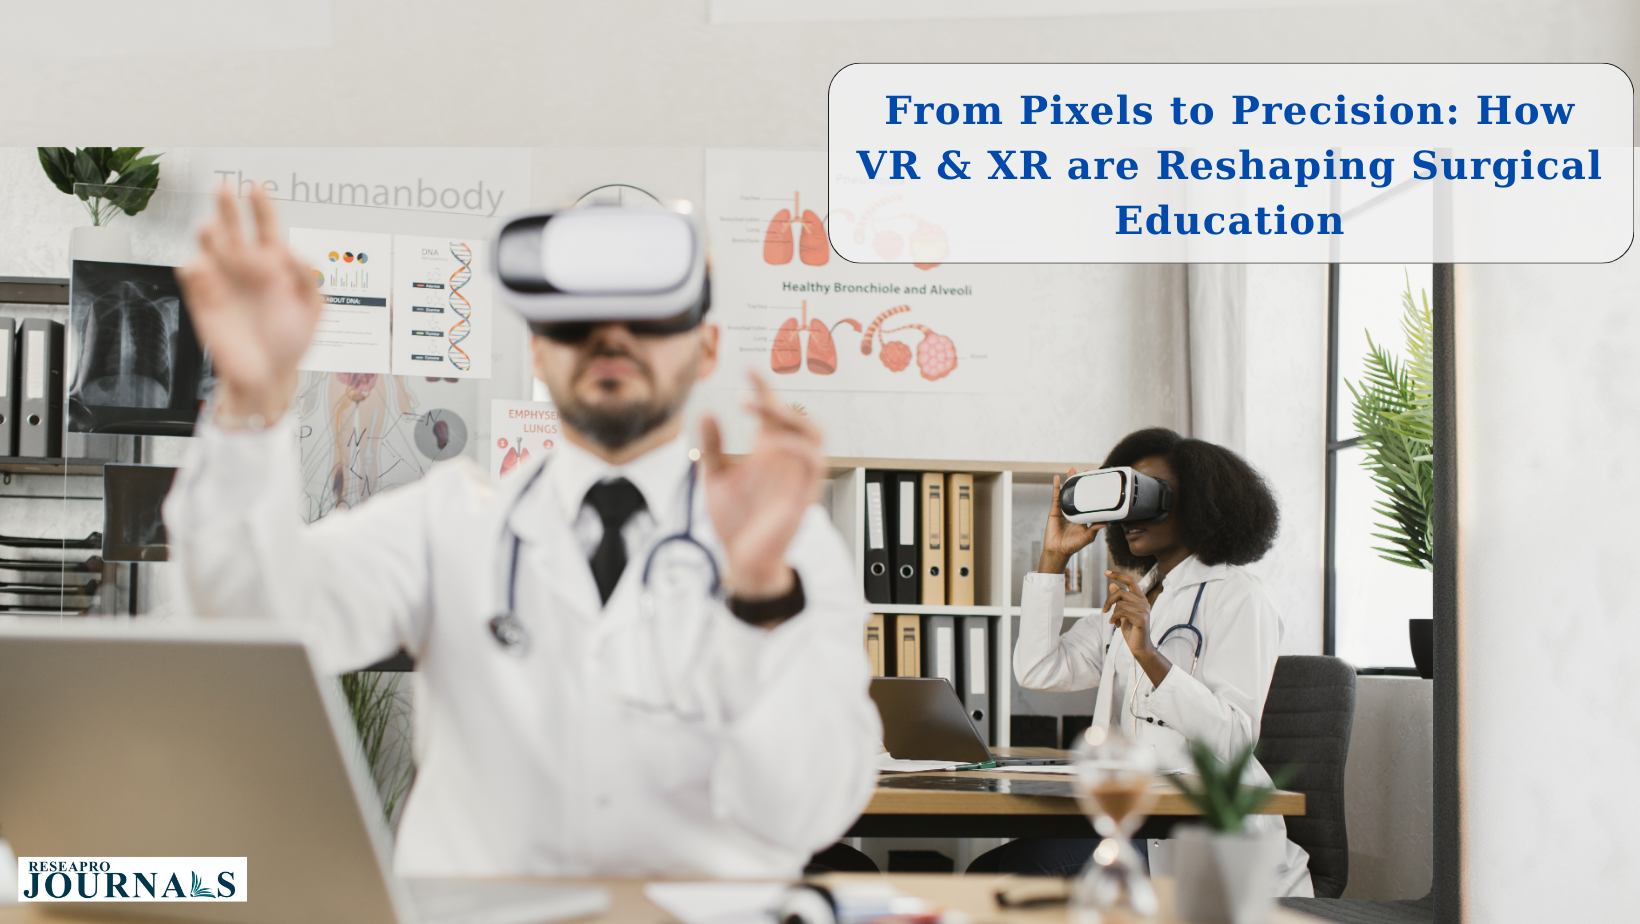 From Pixels to Precision: How VR & XR are Reshaping Surgical Education